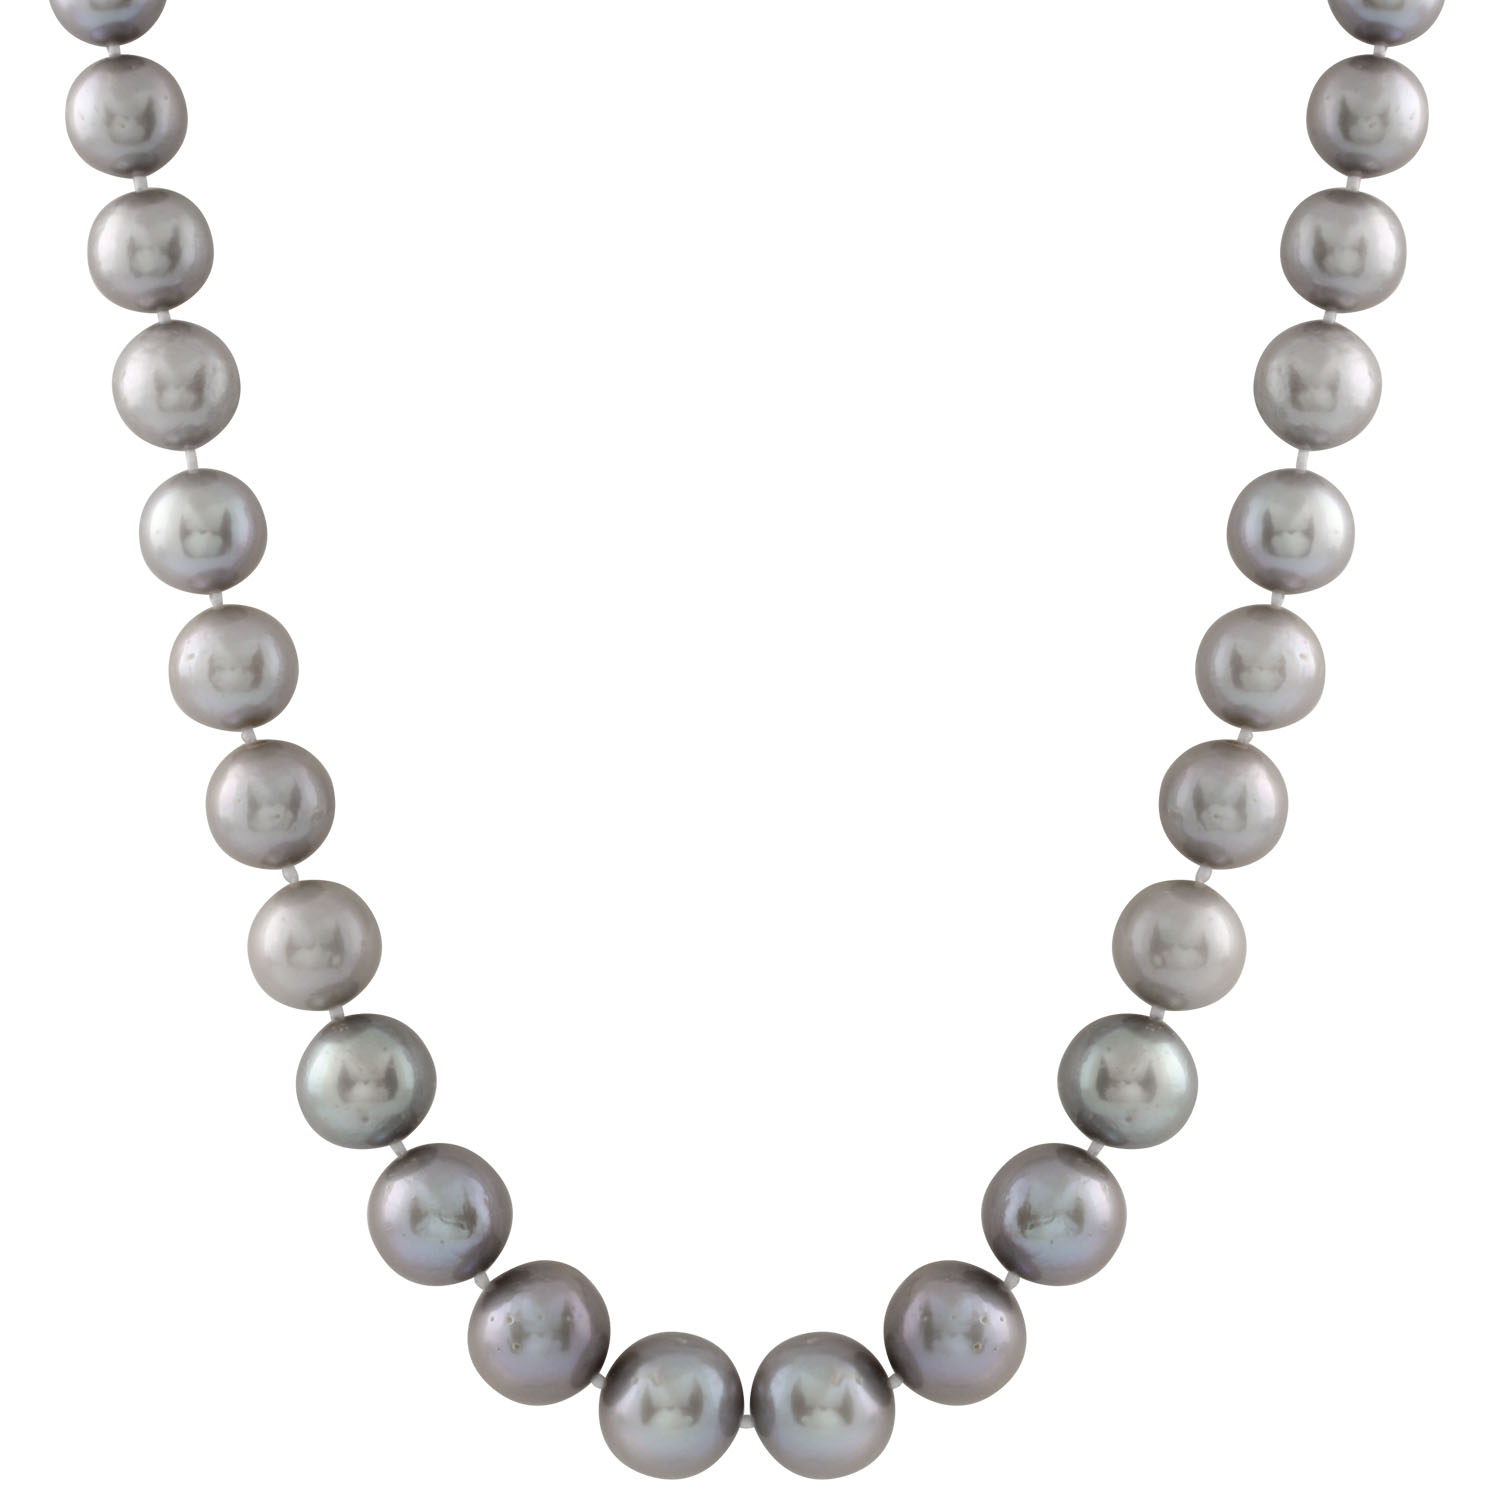 New pearl necklace